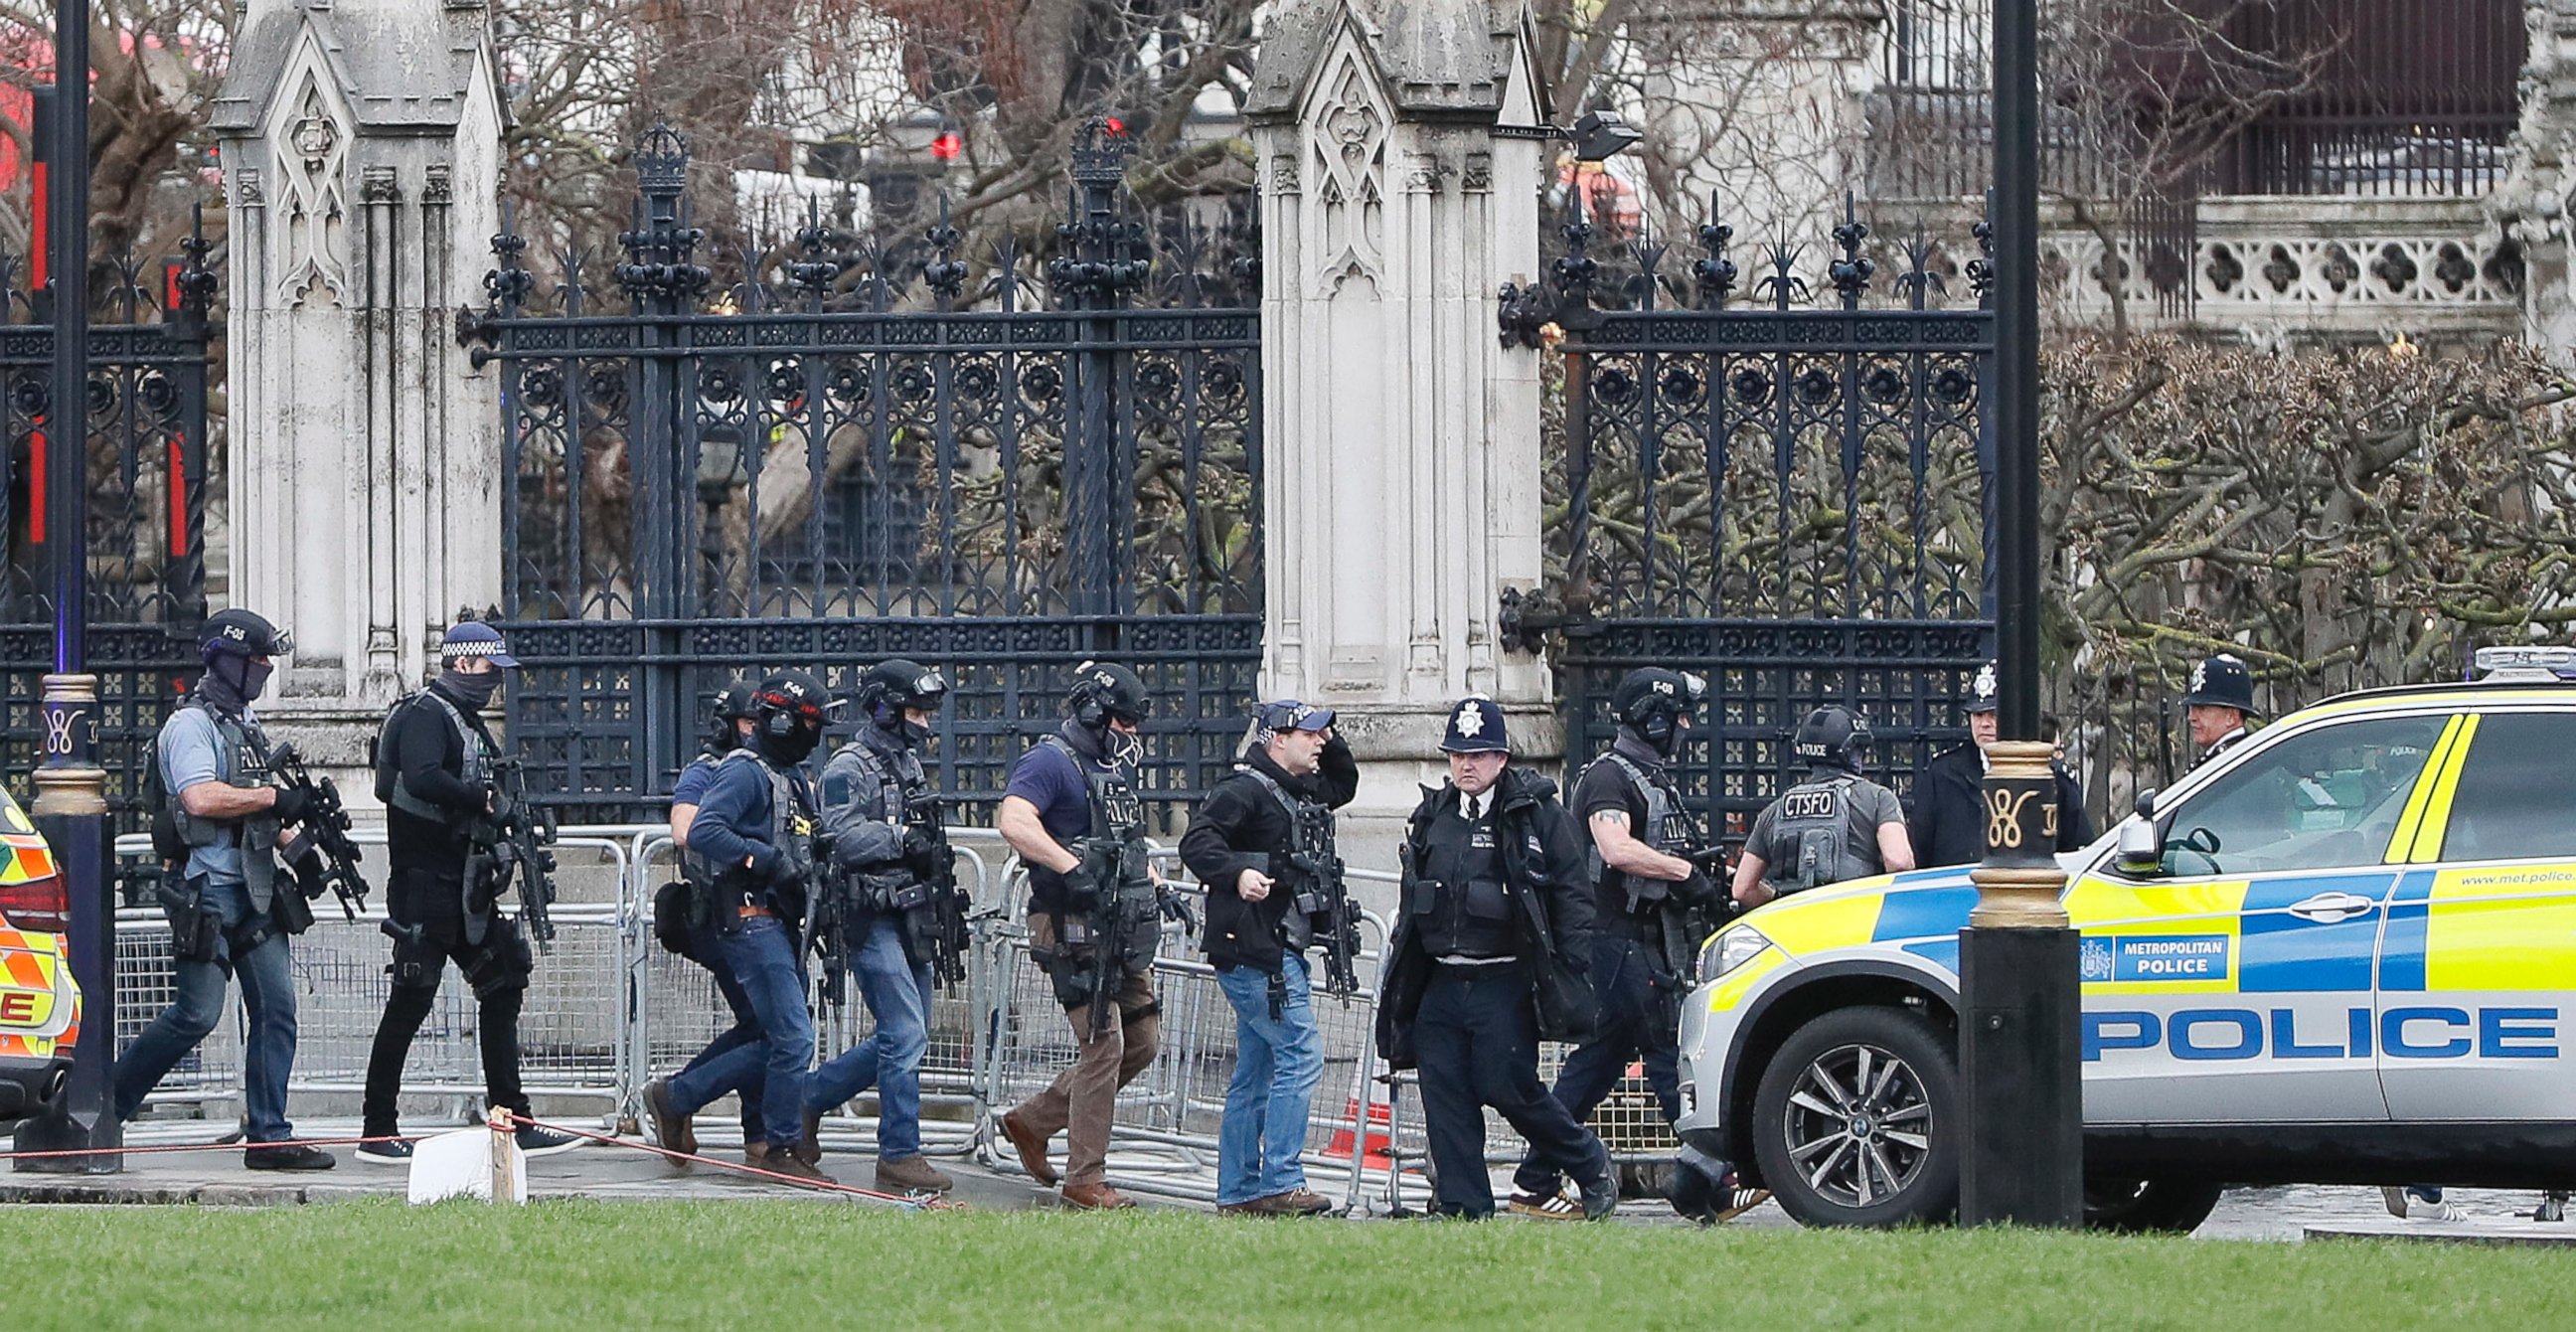 PHOTO: Armed police officers enter the Houses of Parliament in London, March 23, 2017 after the House of Commons sitting was suspended as witnesses reported sounds like gunfire outside.